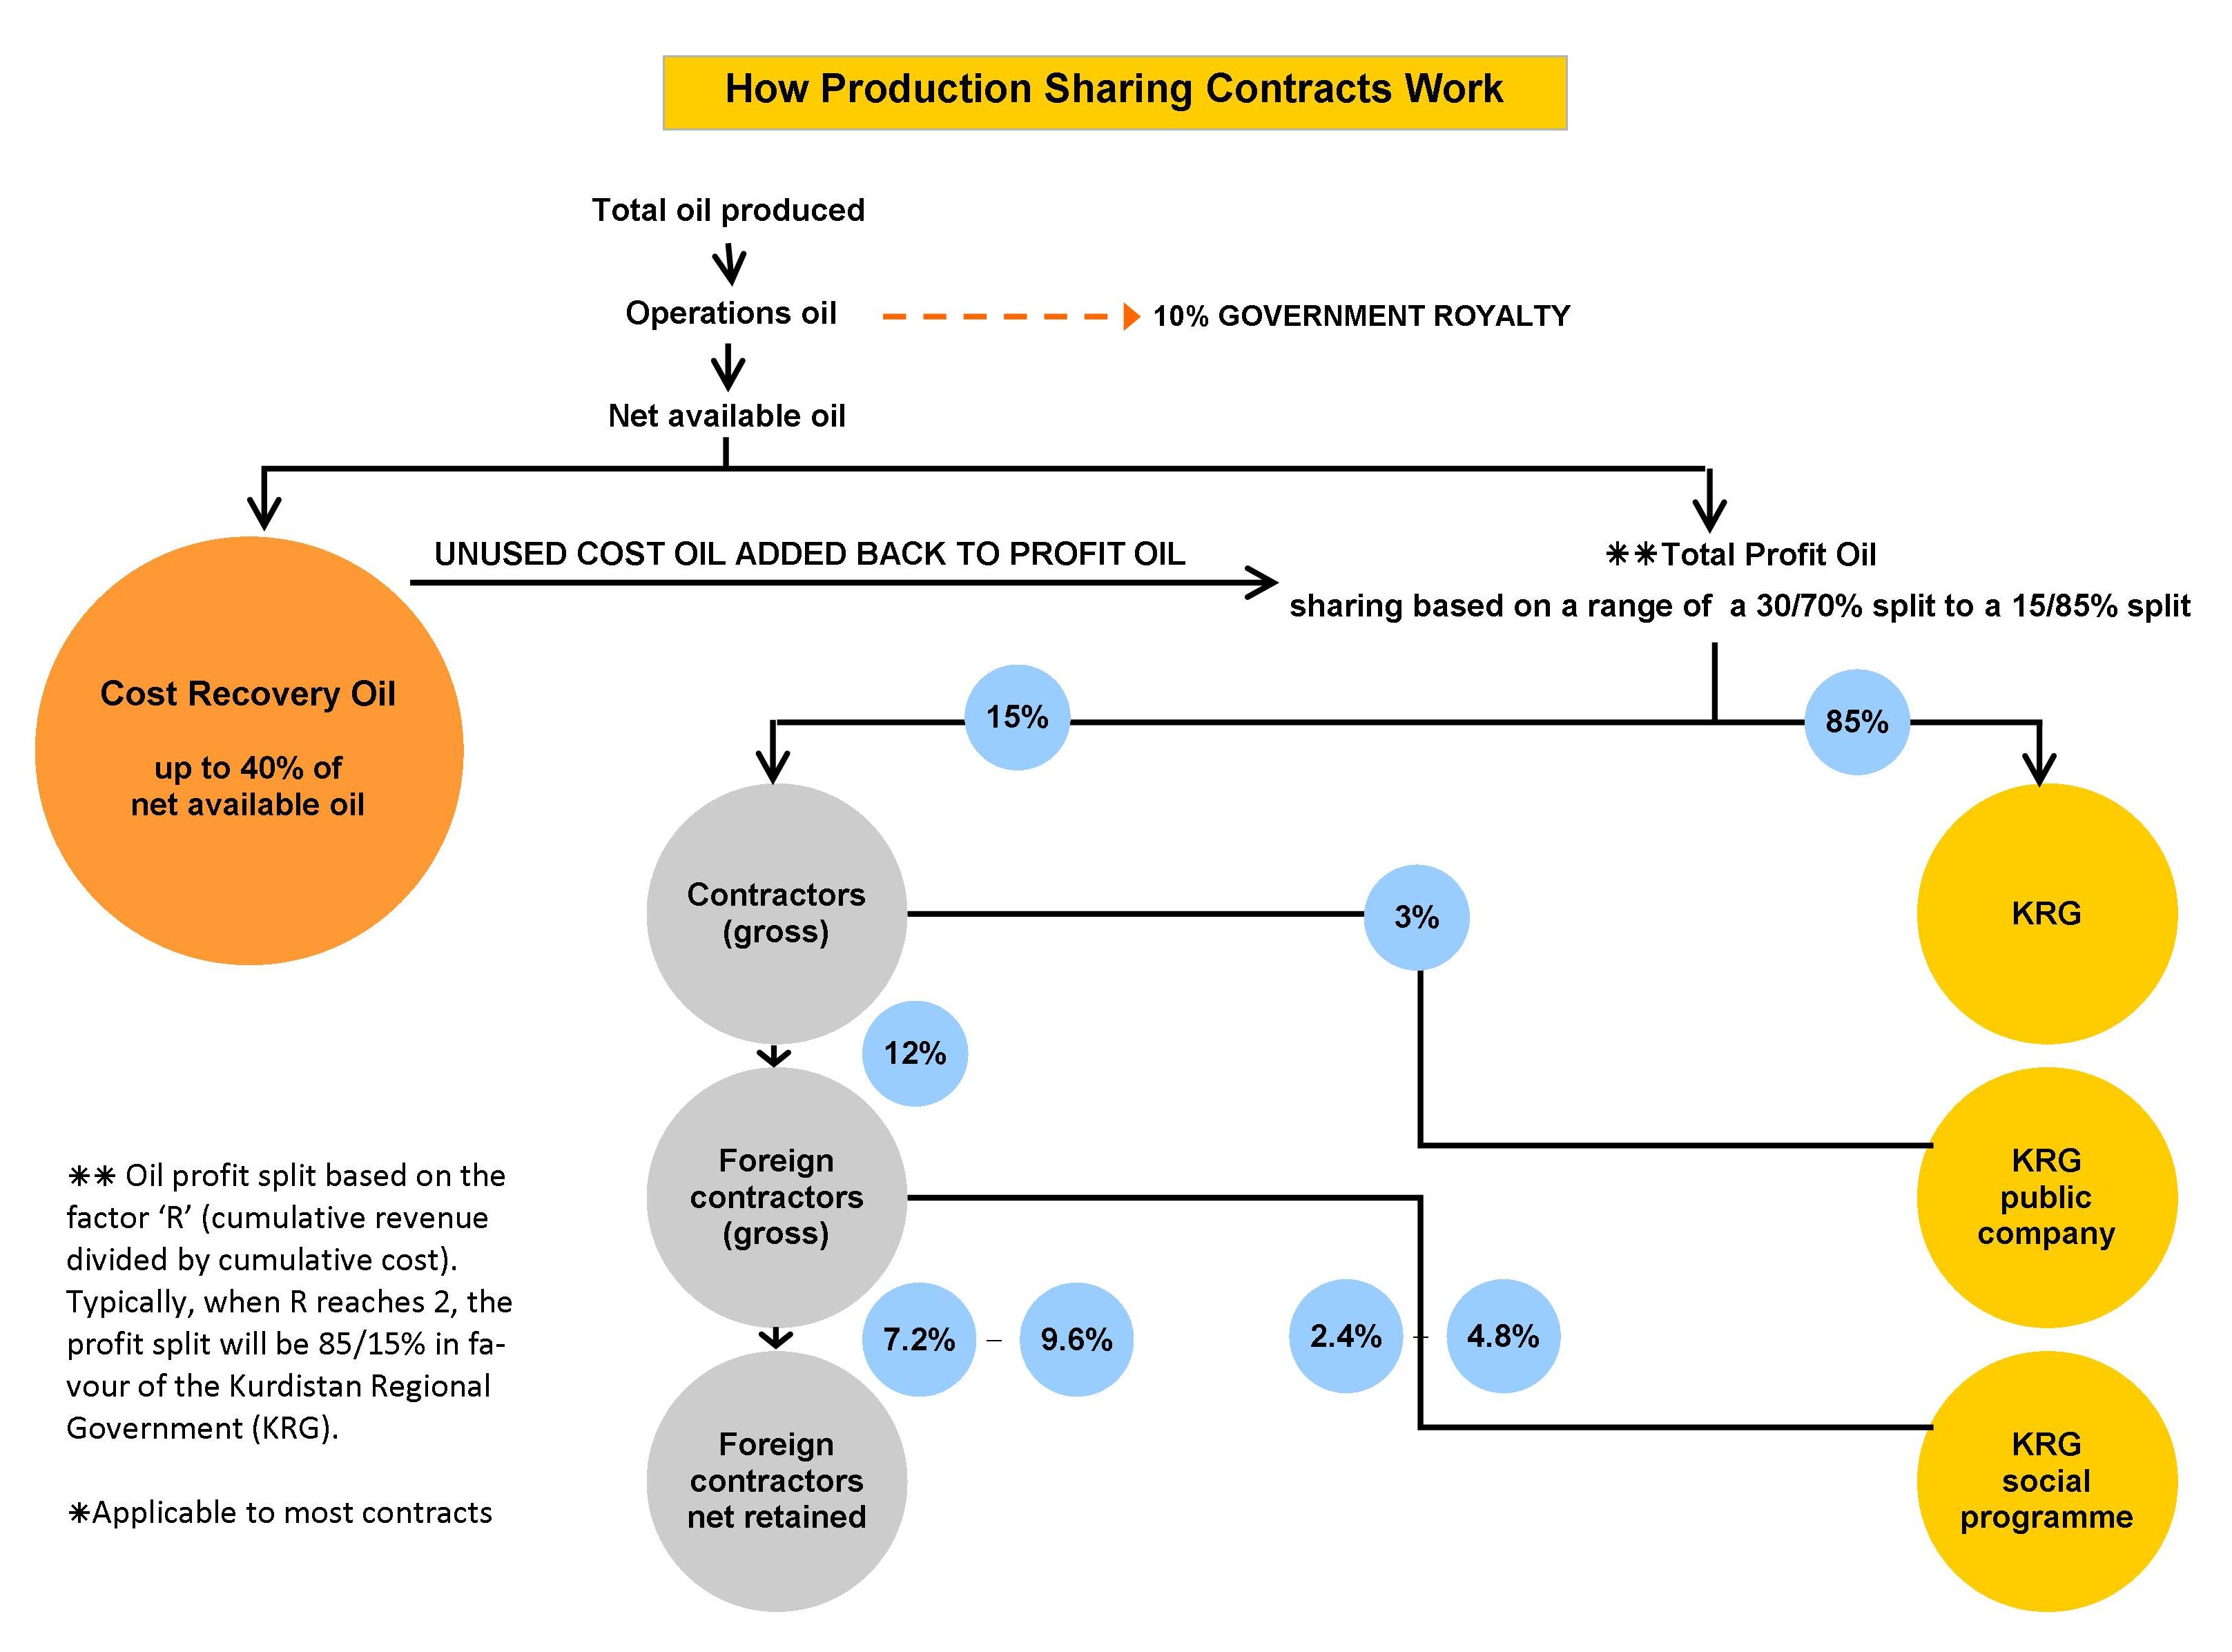 How KRG production sharing contracts work